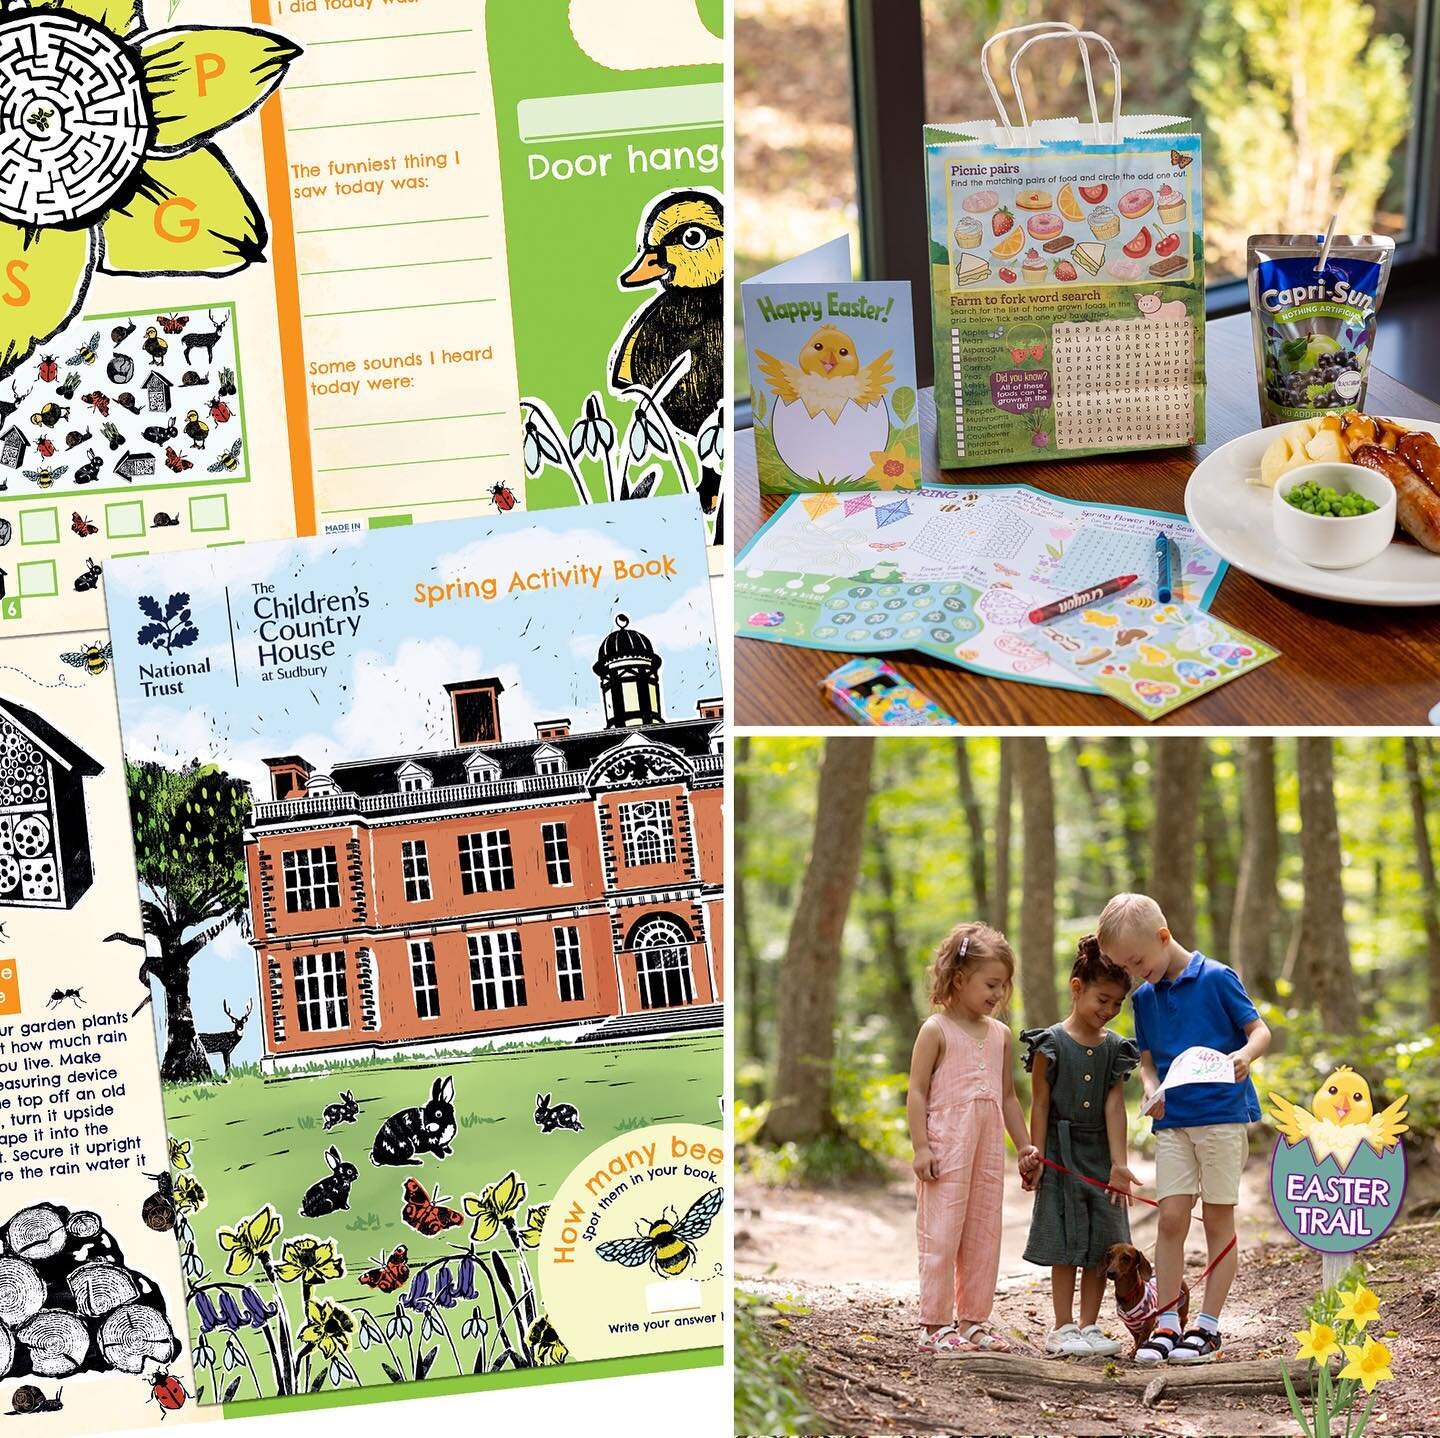 Our new blog is now LIVE! With the Easter holidays looming and Spring on the horizon we explore this uplifting time of year and how to engage visitors with hand-illustrated:

🐣 Easter explorer trails
🐰 Personalised activity sheets
🪺 Bespoke activi